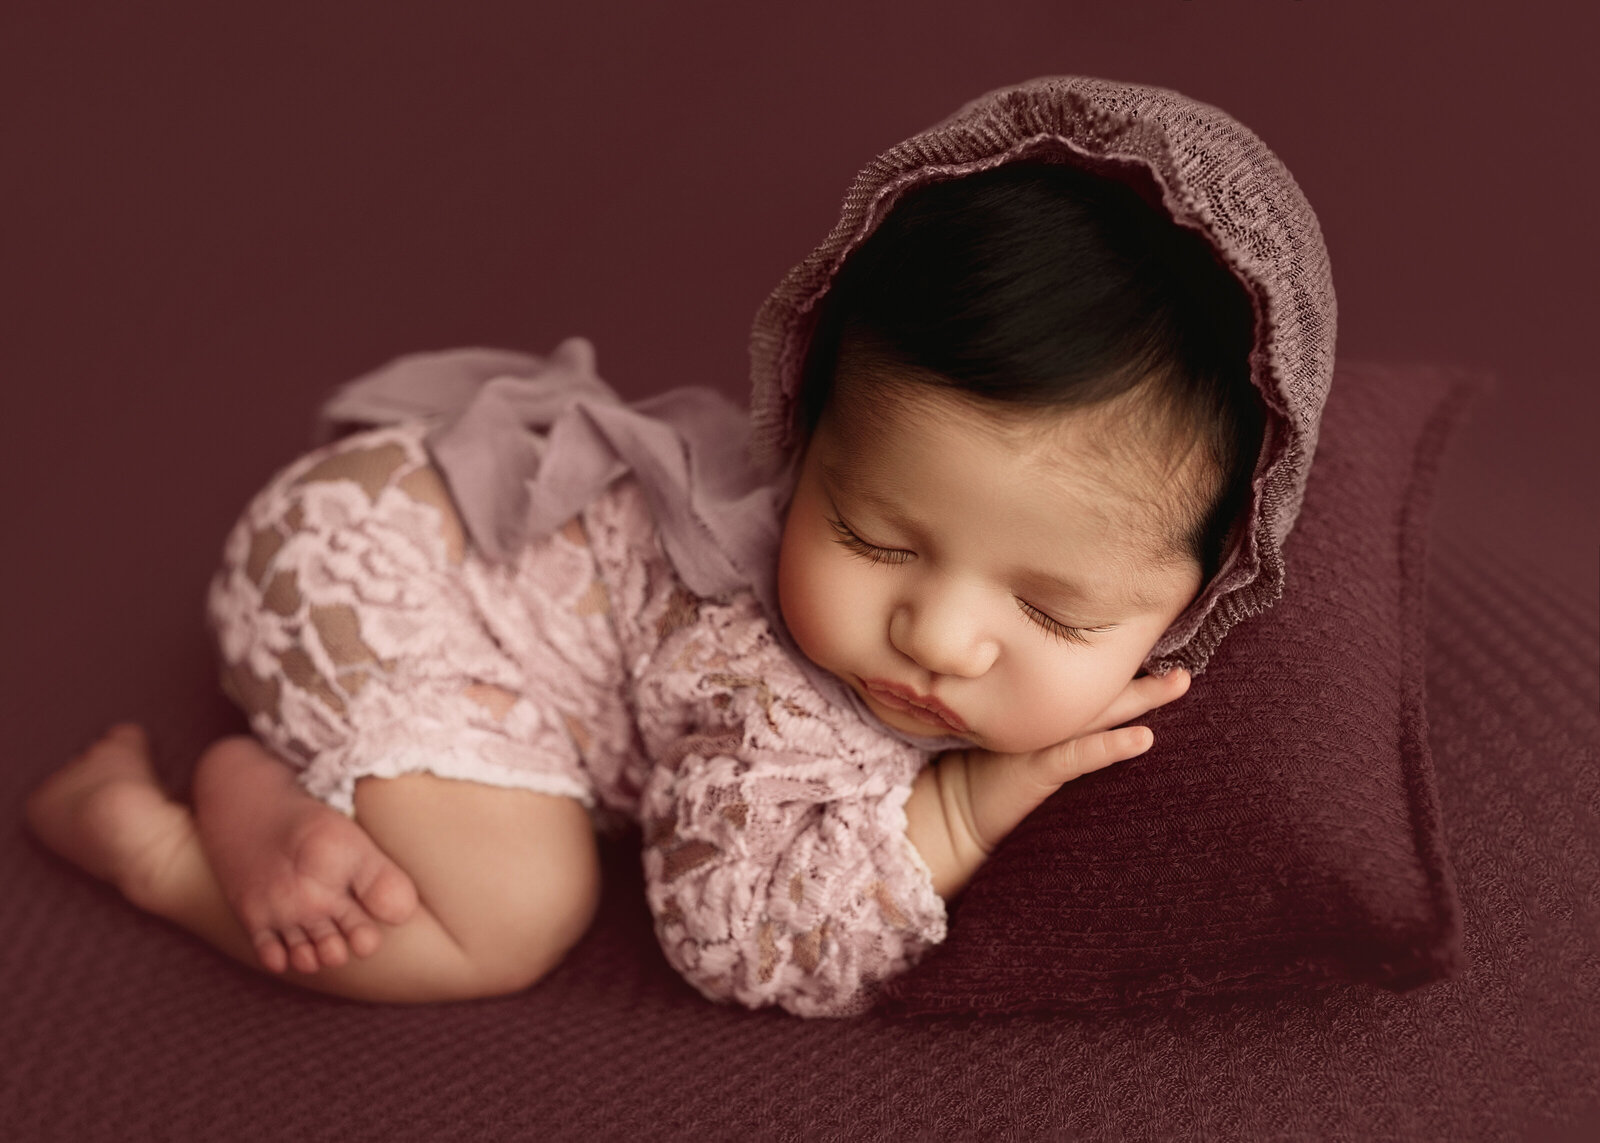 newborn baby wearing little outfit in pink mauve studio setting portrait